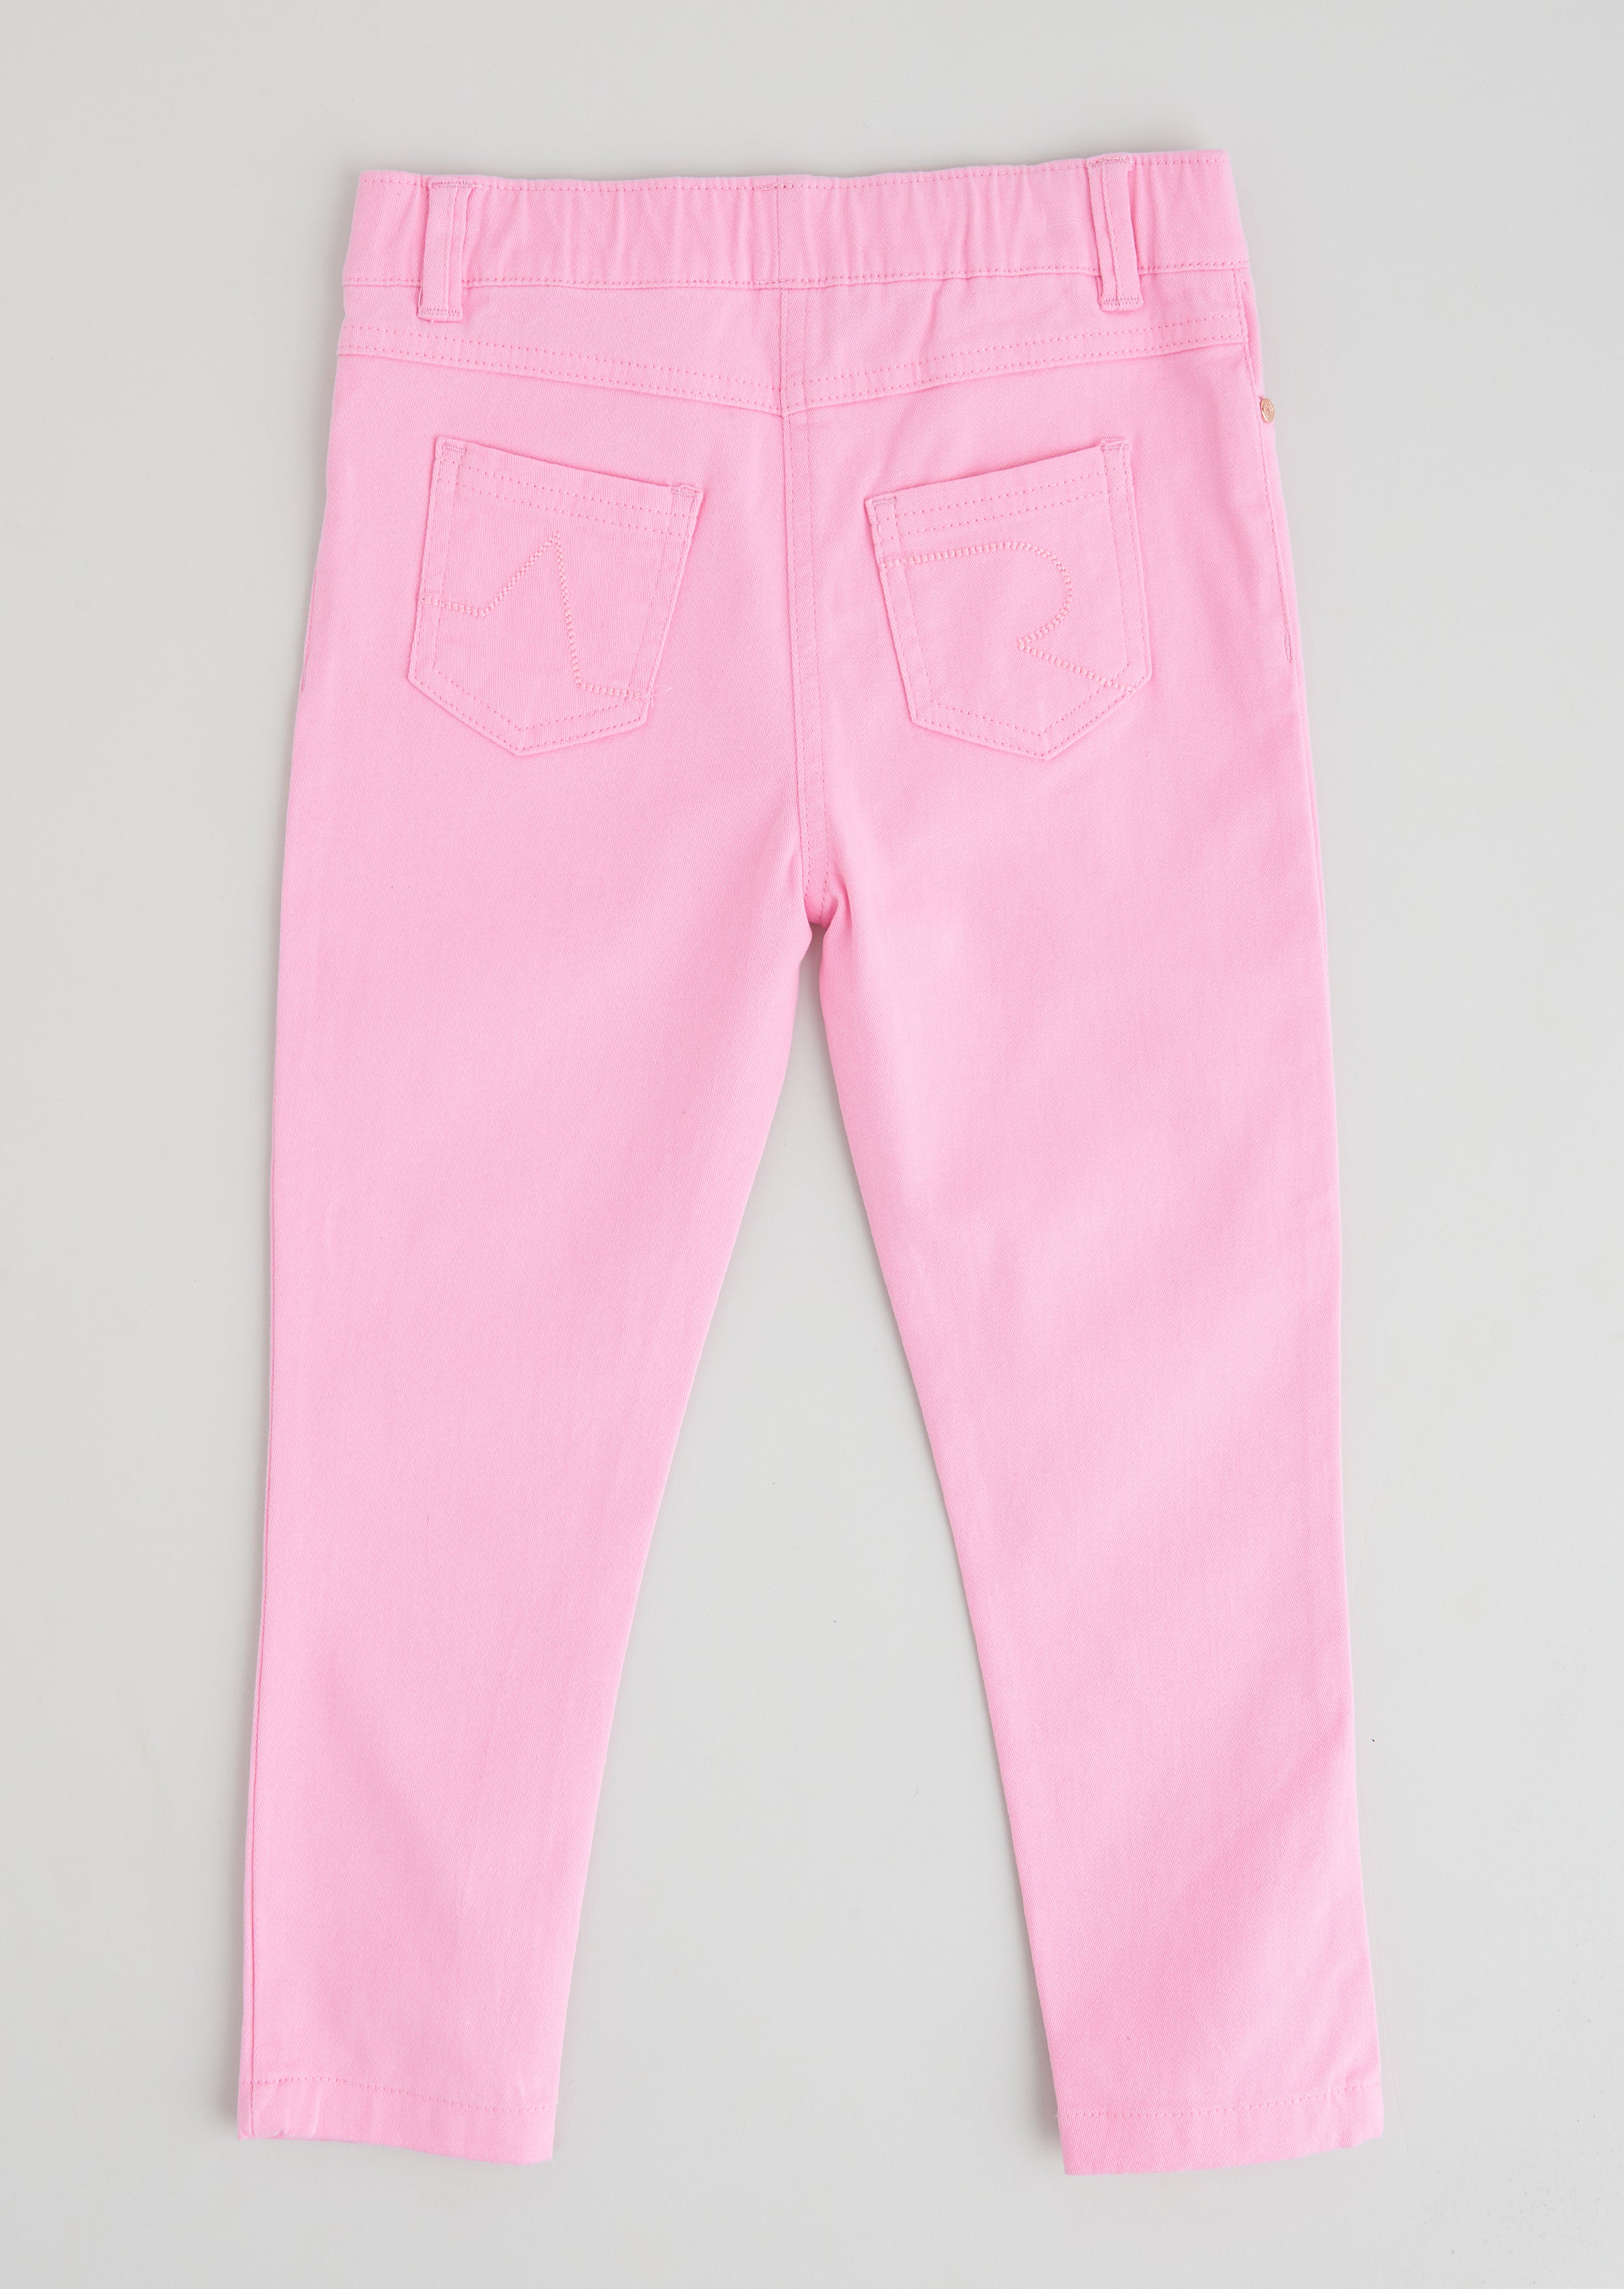 Girls Pink Woven Jeggings